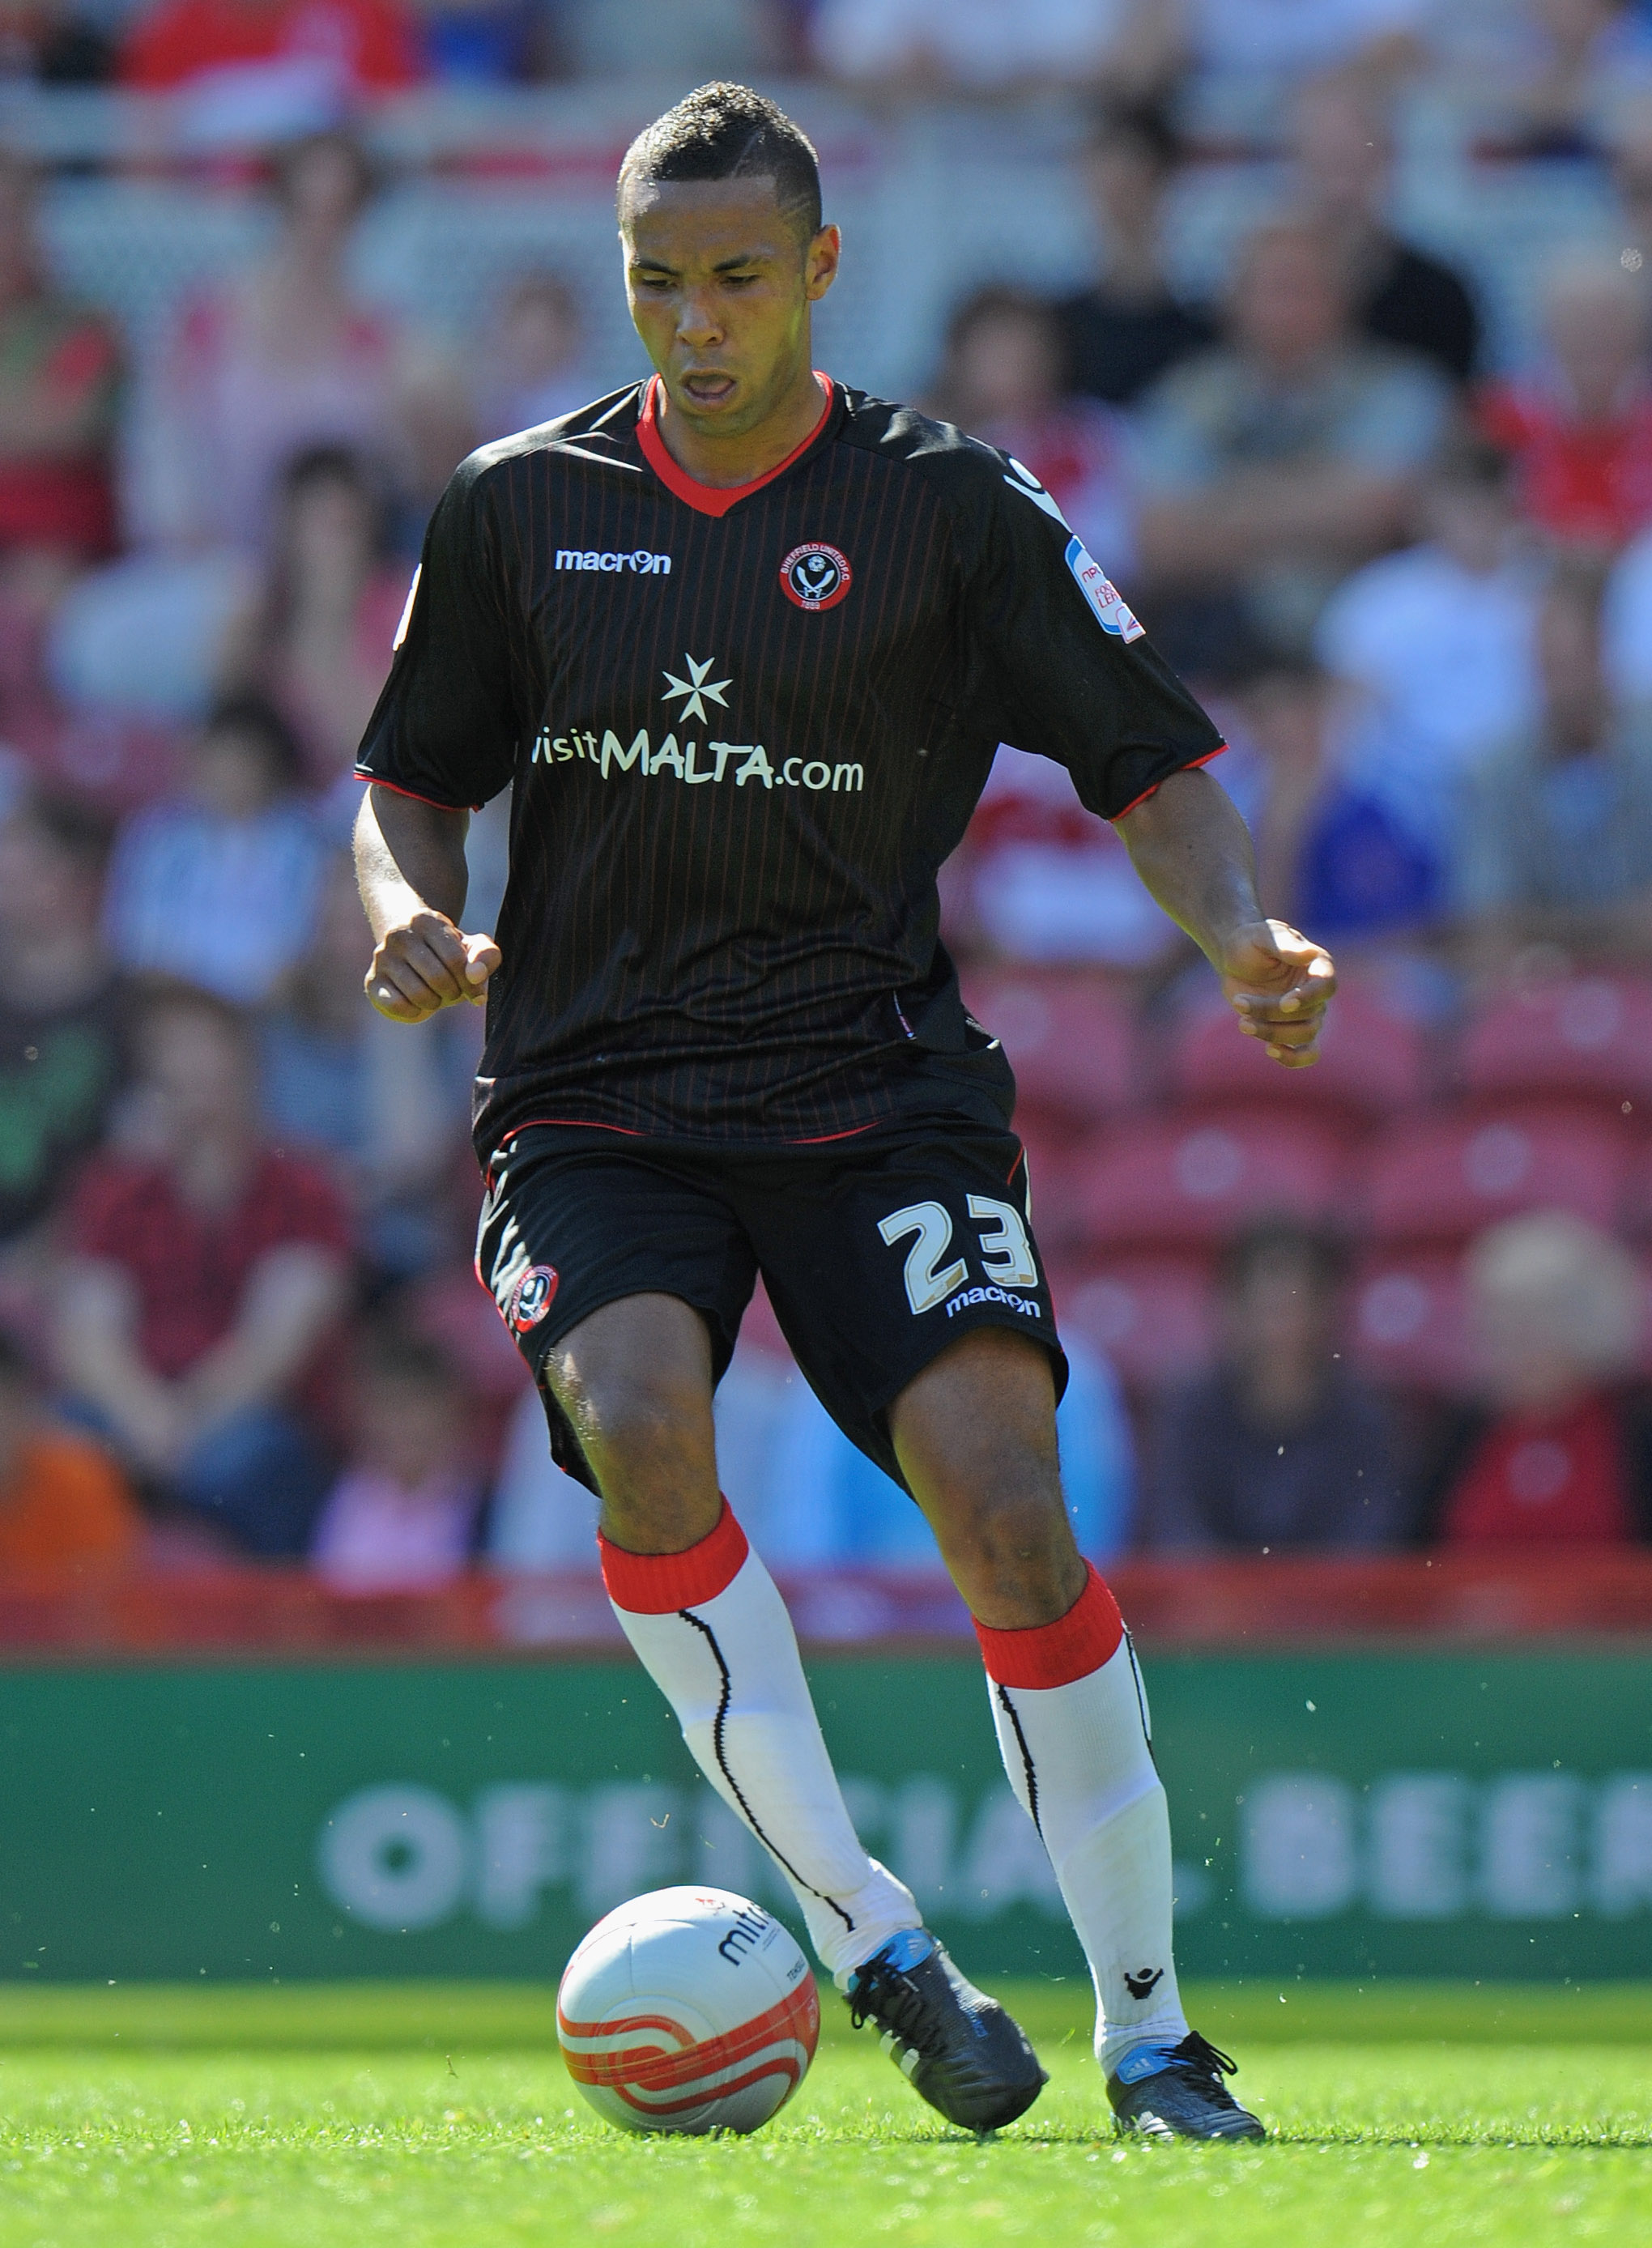 MIDDLESBROUGH, ENGLAND - AUGUST 22: Kyle Bartley of Sheffield United in action during the npower Championship match between Middlesbrough and Sheffield United at the Riverside Stadium on August 22, 2010 in Middlesbrough, England.  (Photo by Michael Regan/